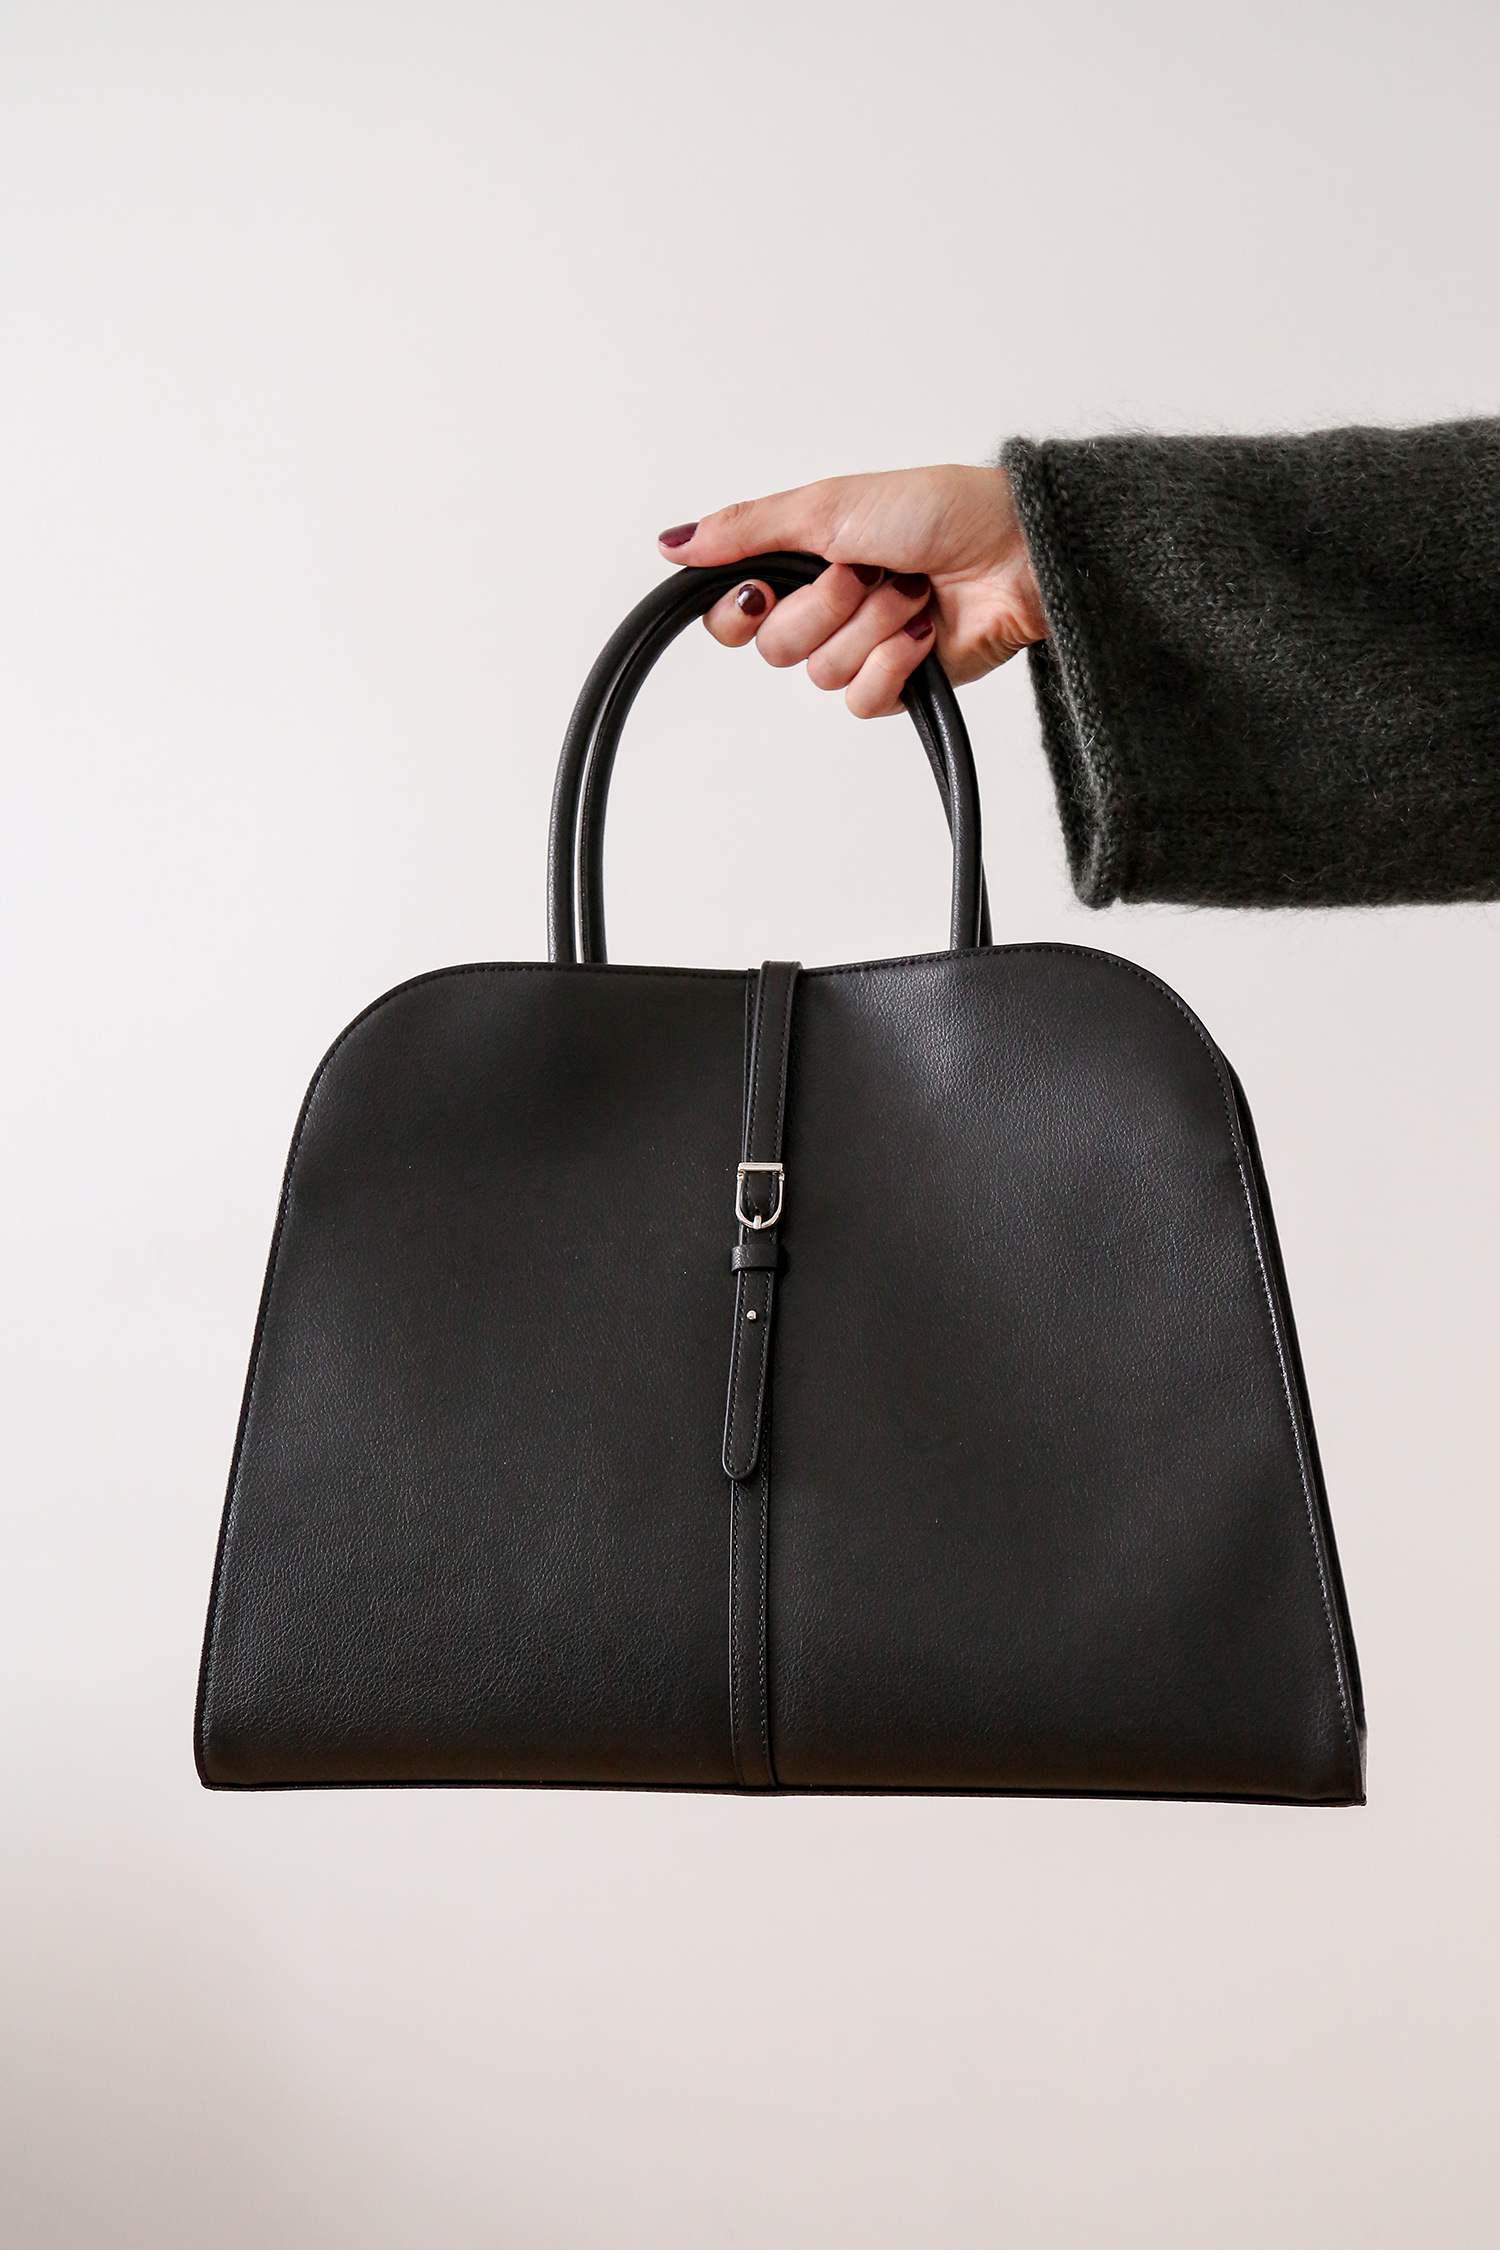 Is this the affordable answer to The Row’s Margaux Tote?